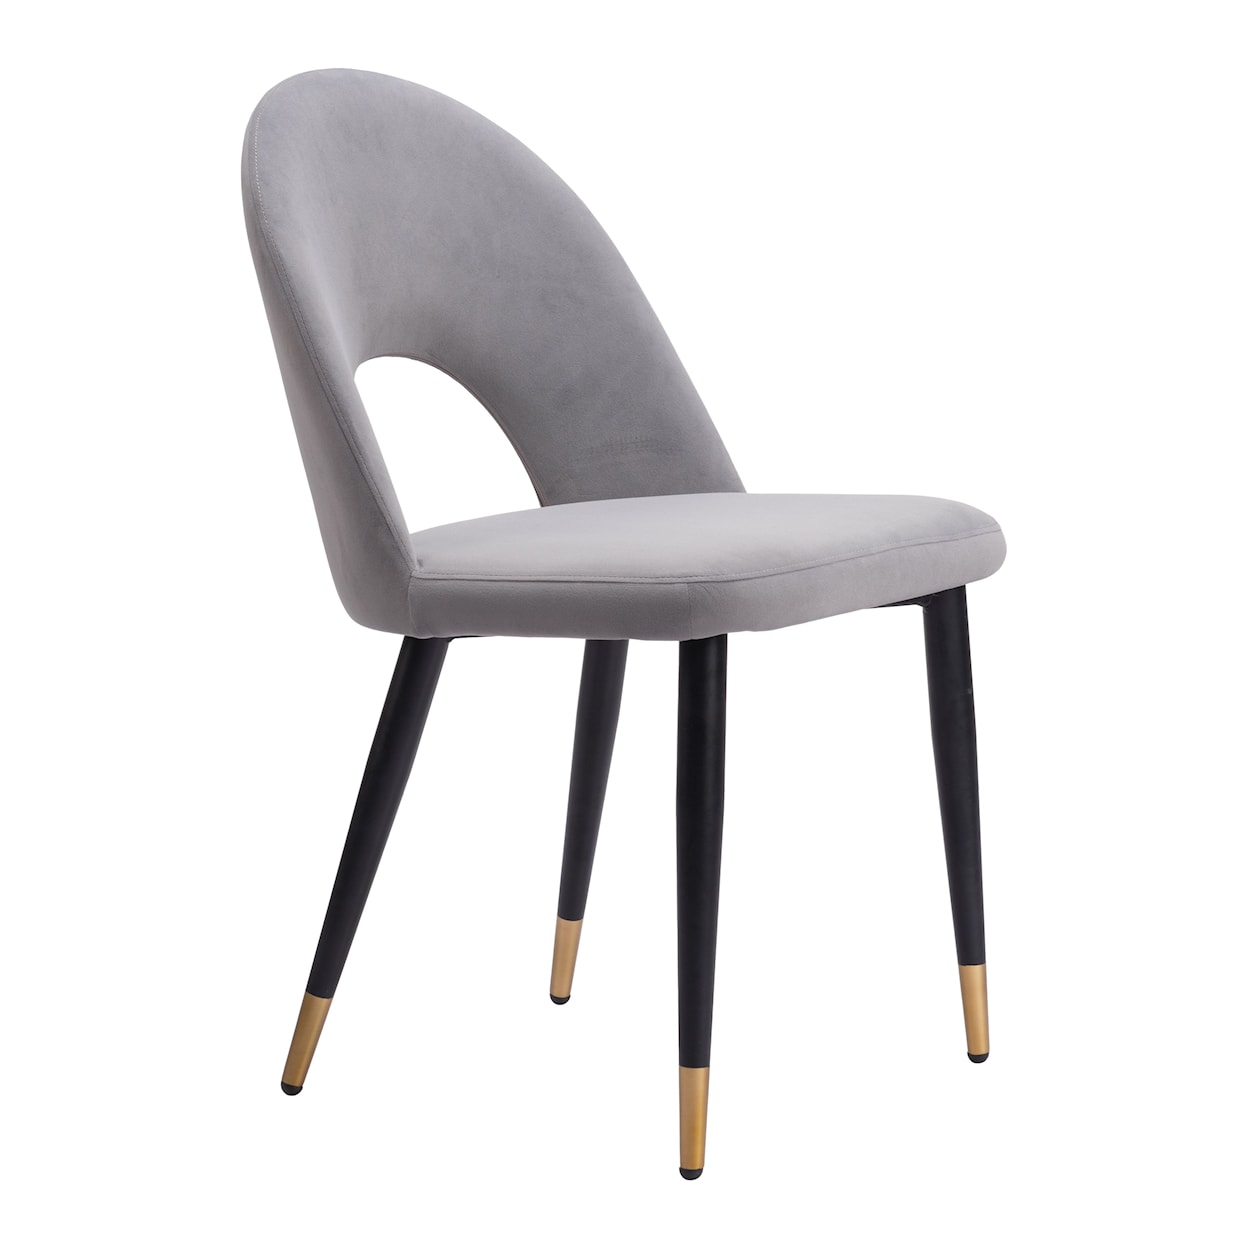 Zuo Menlo Collection Dining Chair